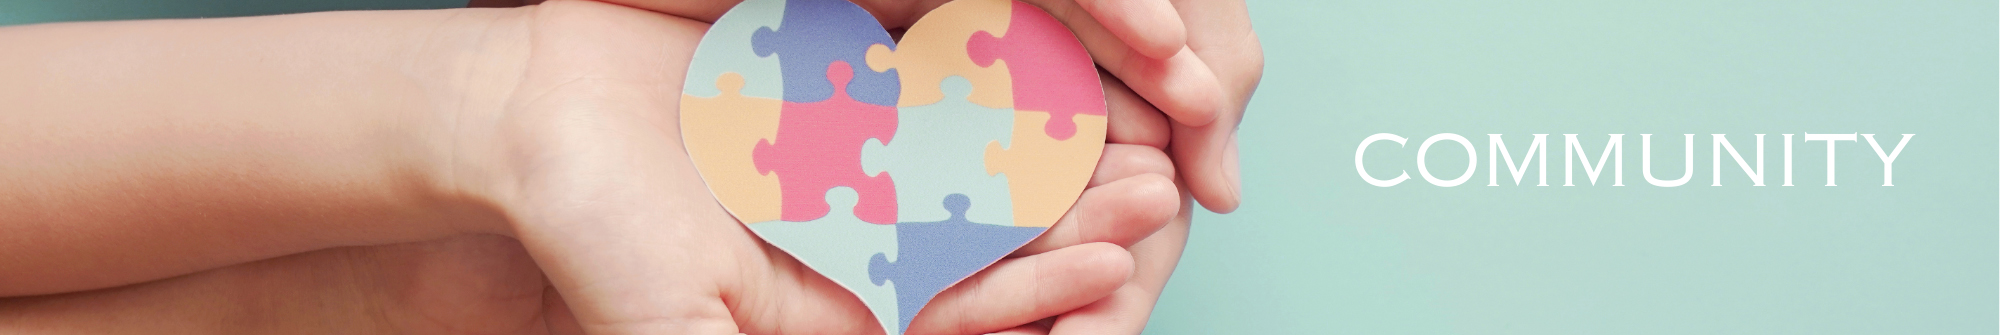 Hands holding heart-shaped puzzle with the word Community